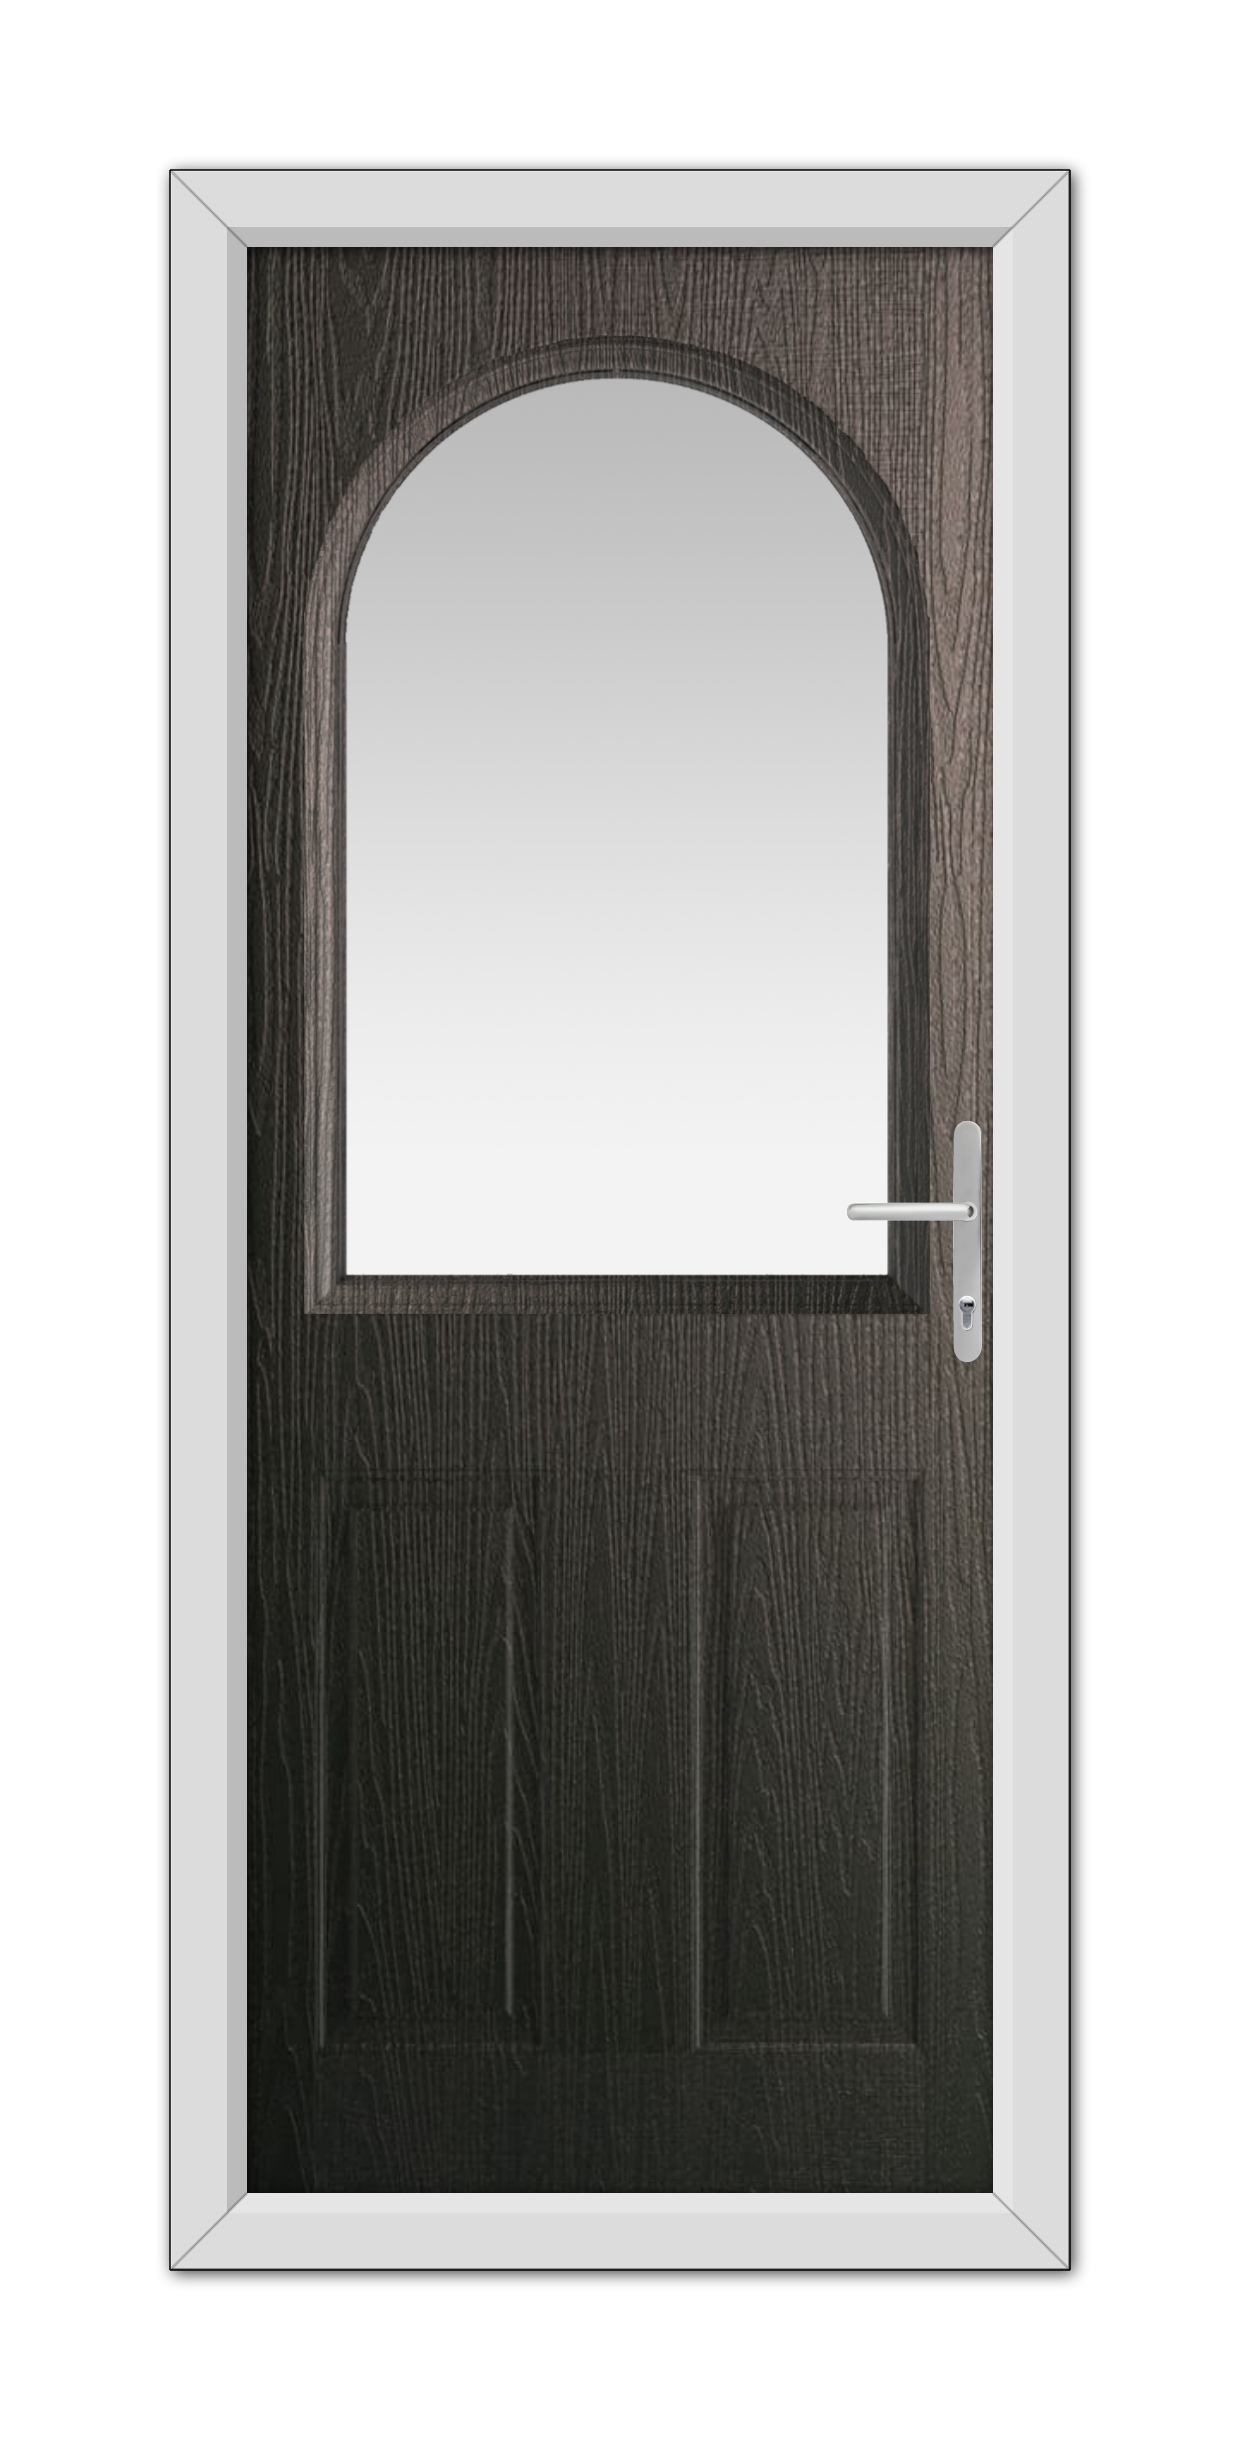 A modern Schwarzbraun Grafton Composite Door 48mm Timber Core with a large glass panel at the top and a sleek metal handle, set within a white frame, isolated on a white background.